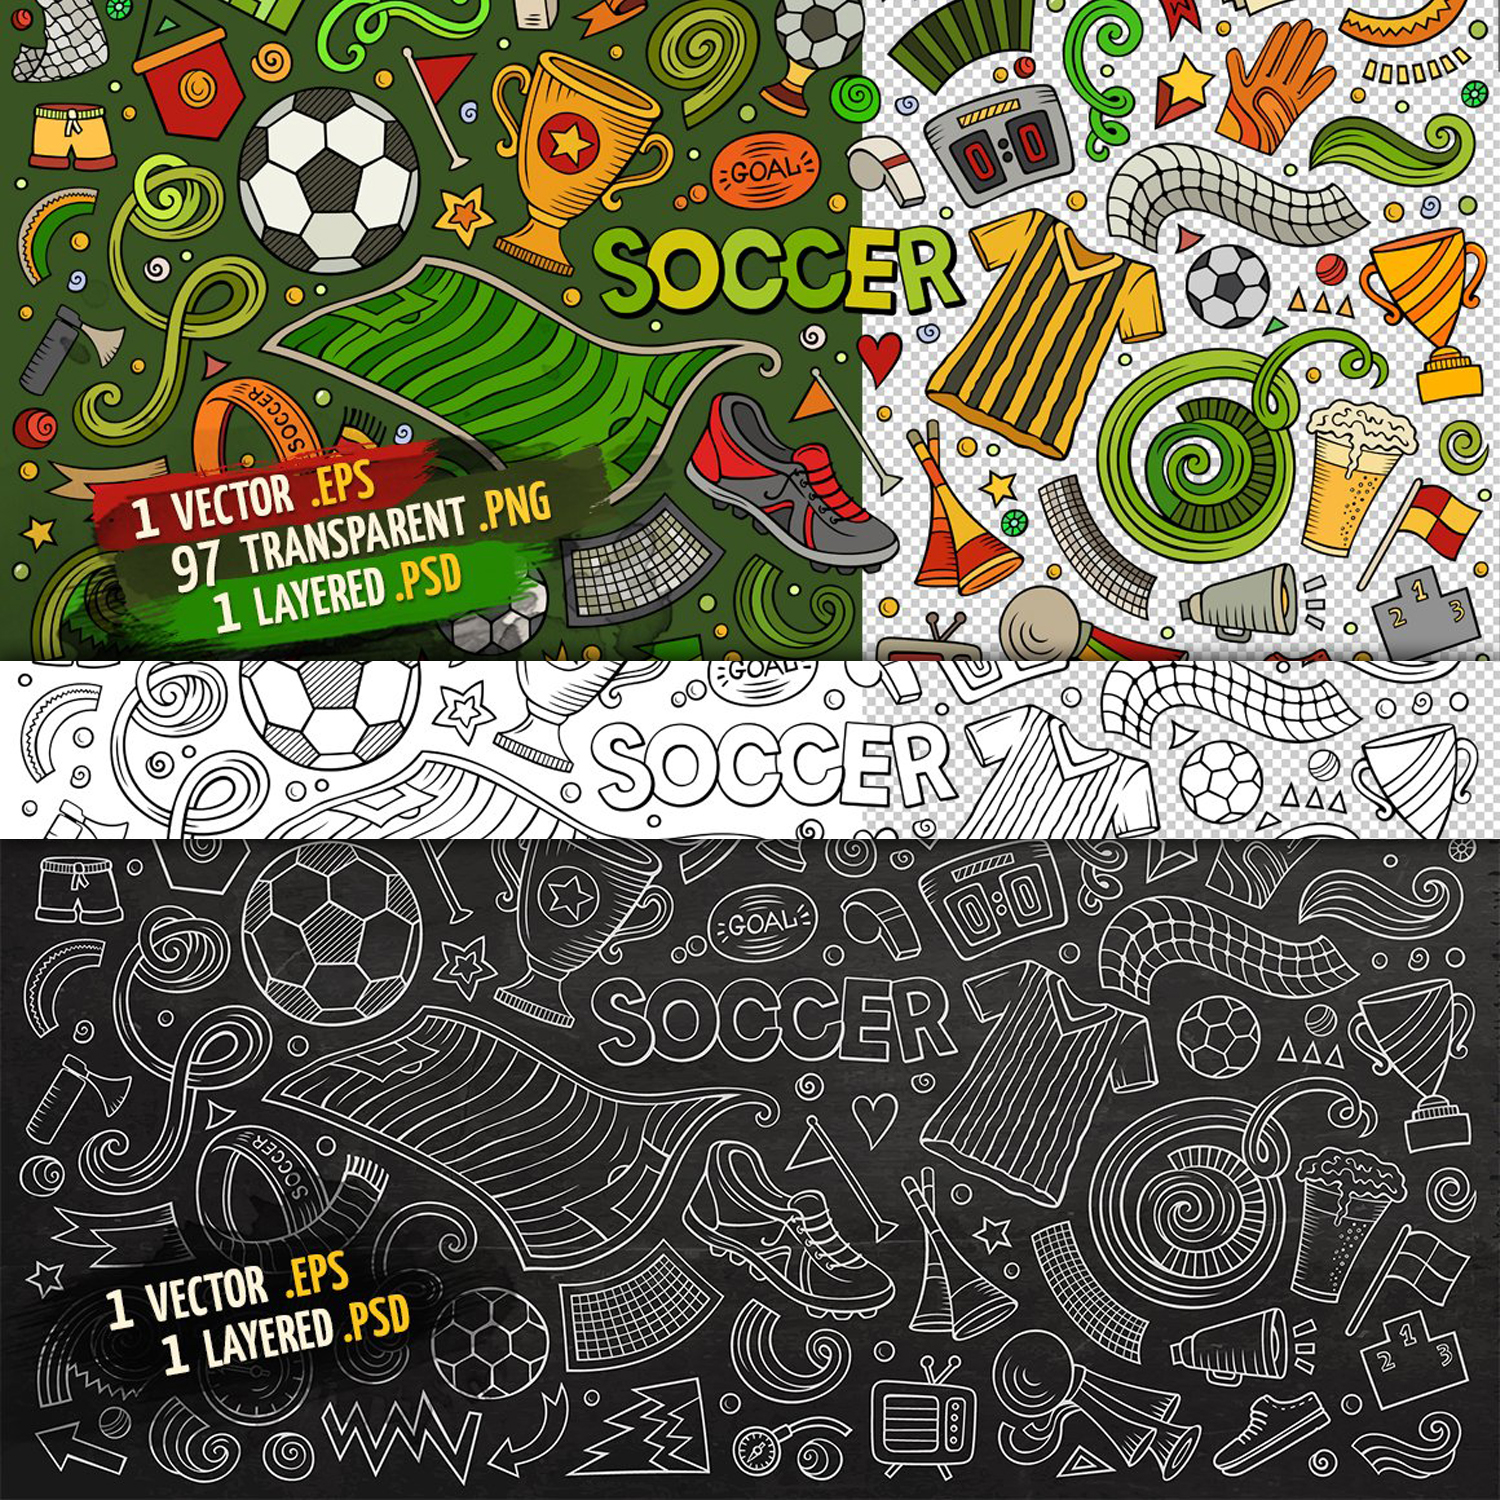 Soccer objects elements set.